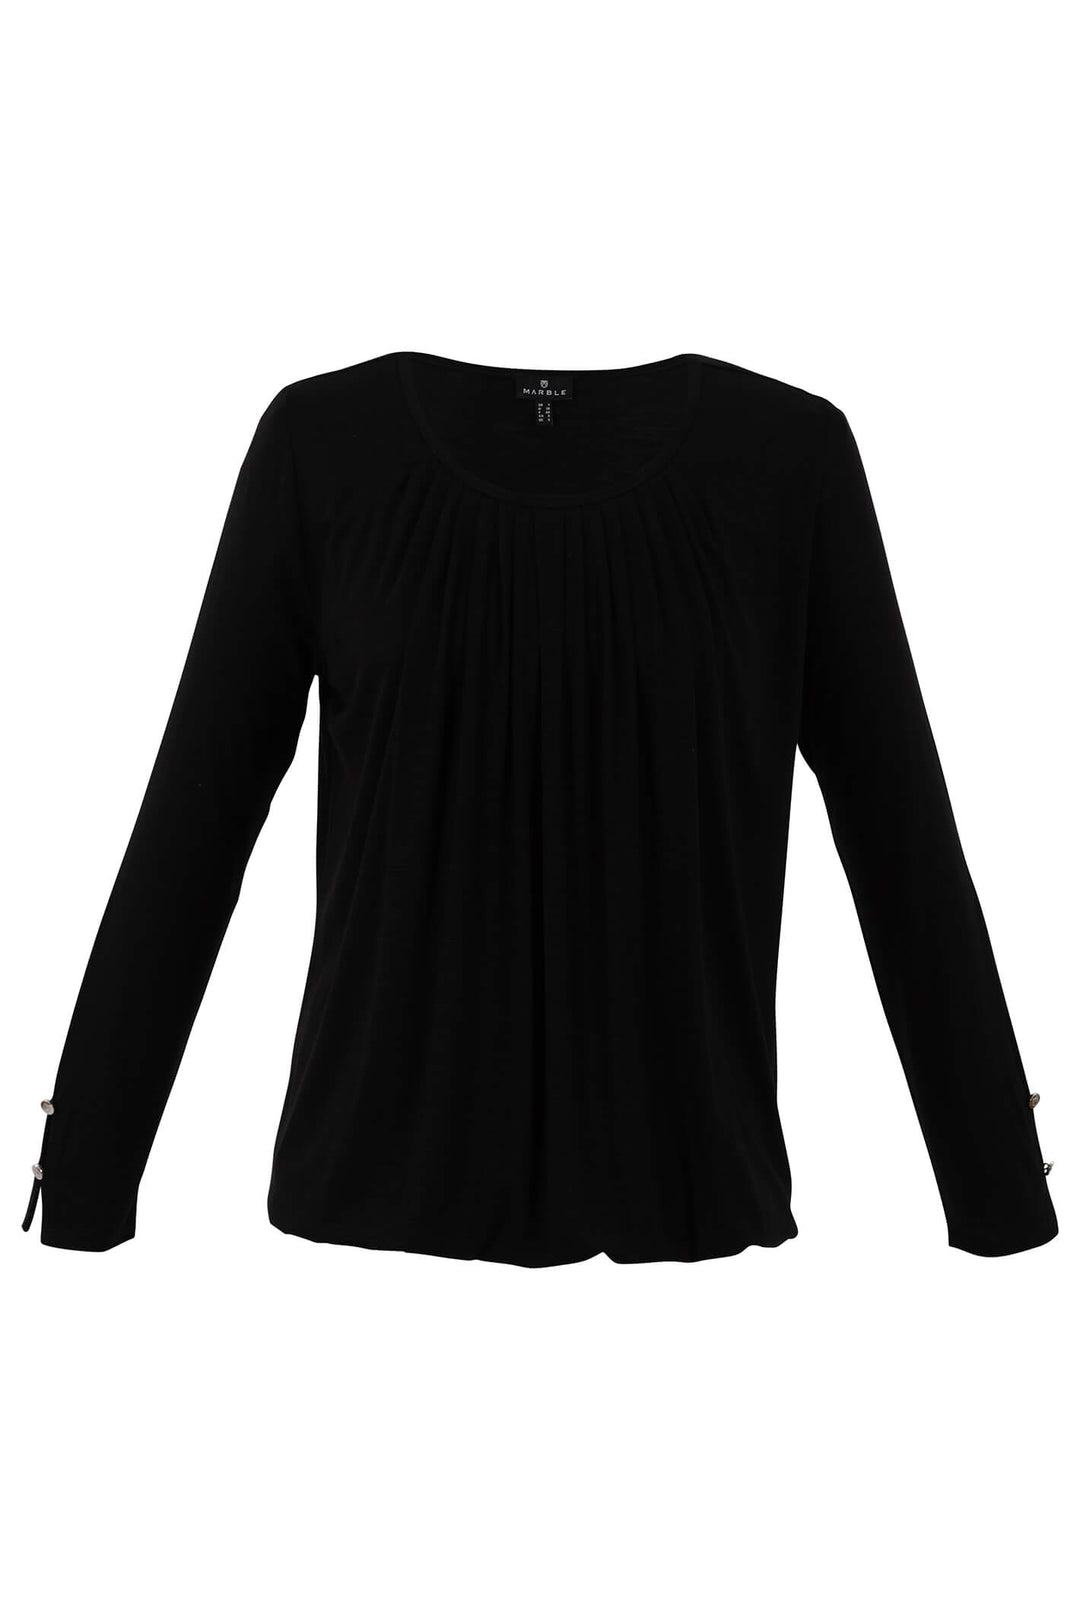 Marble Fashion 7093 101 Black Gathered Front Long Sleeve Top - Experience Boutique